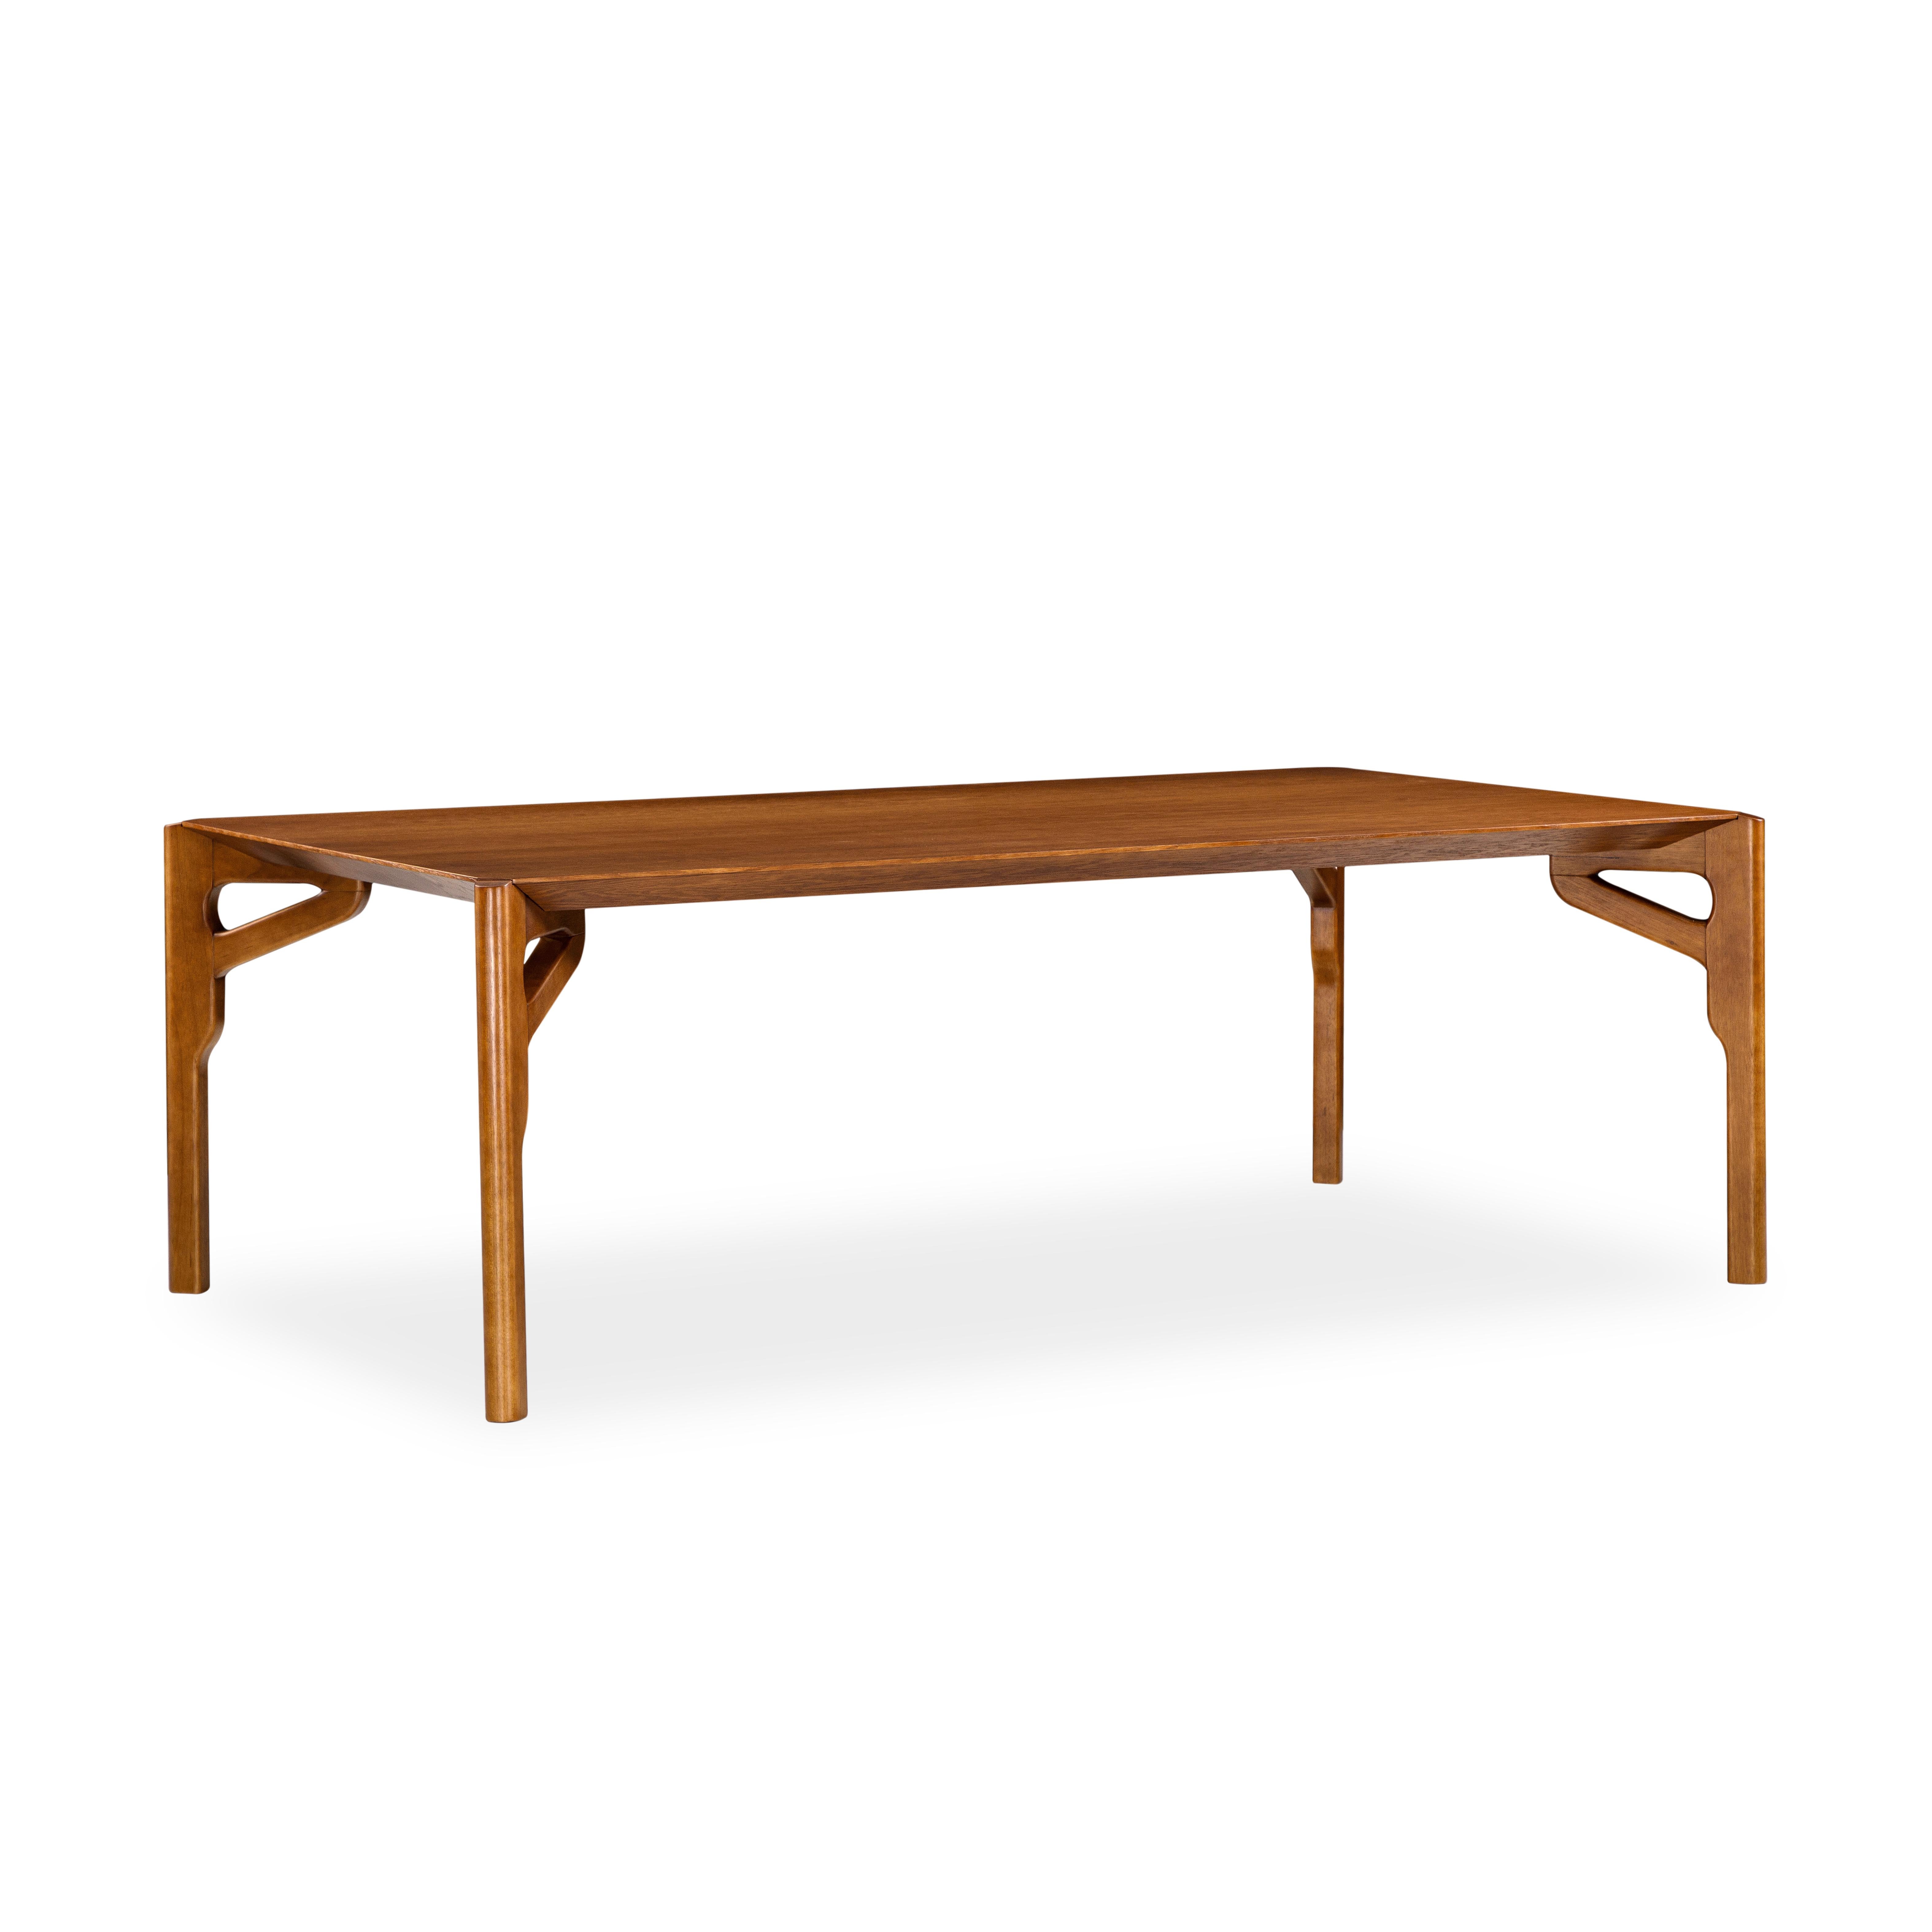 The Hawk dining table has been designed by our Uultis Design team with an oak finish veneered table, the perfect addition to any dining room. It is a sophisticated table for modern contemporary decor, inspired by Brazilian culture. The large